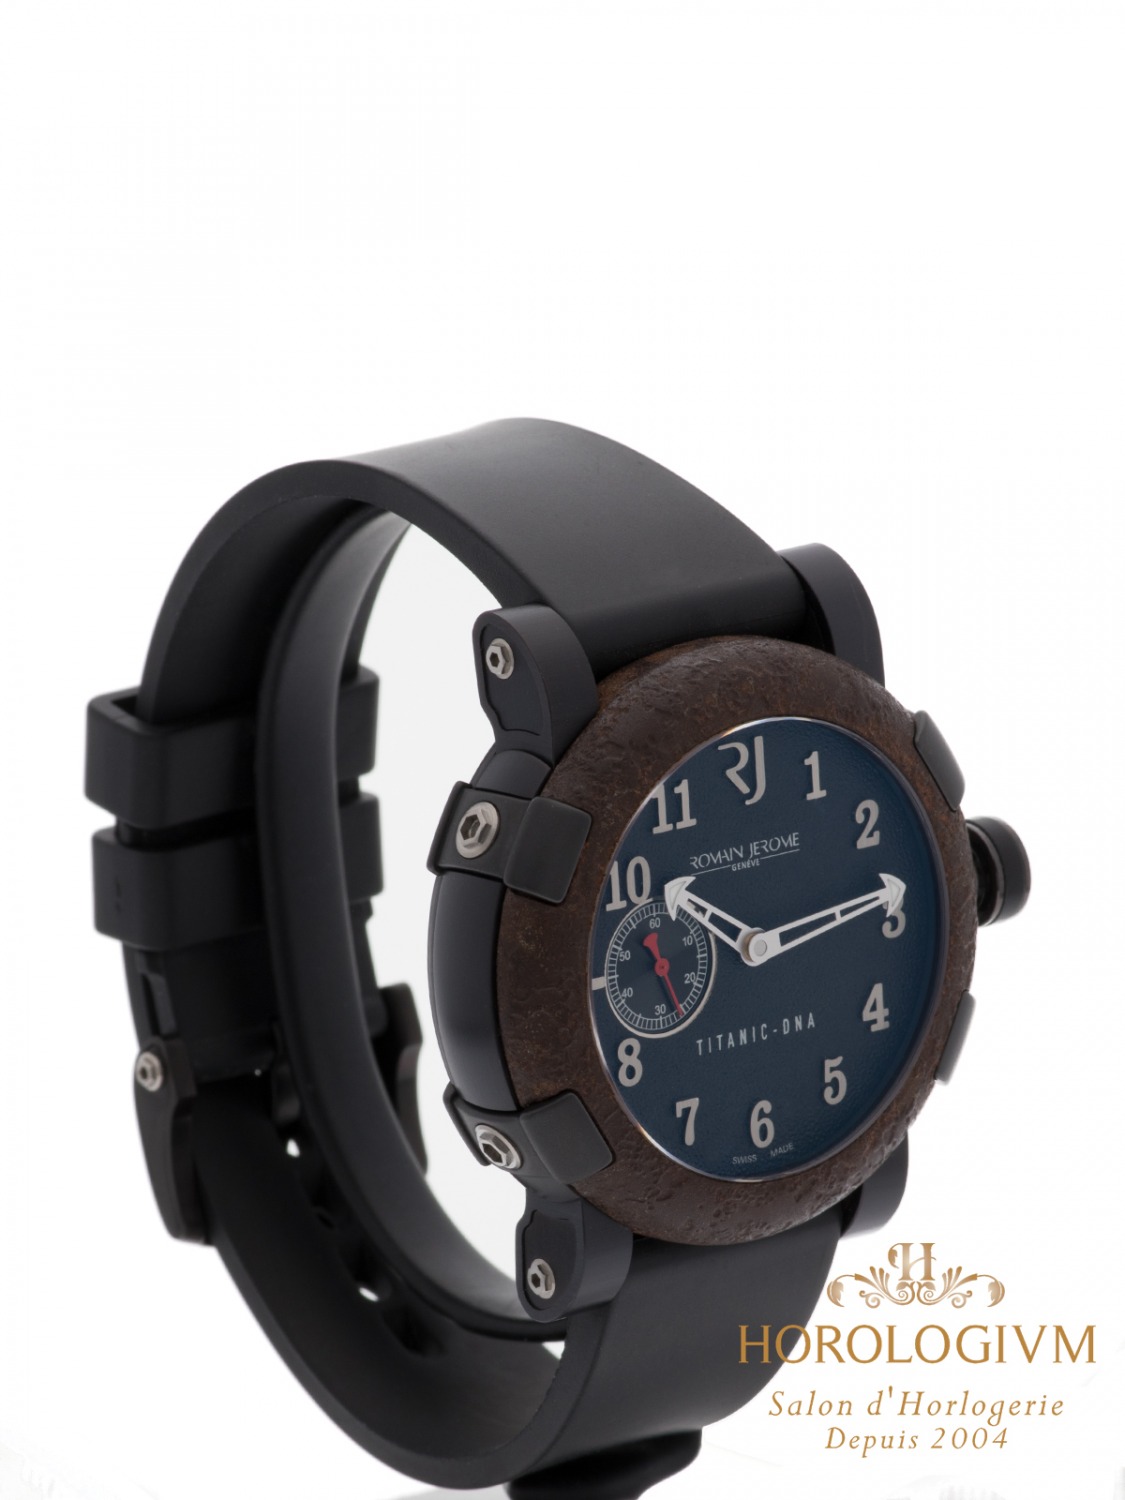 Romain Jerome TITANIC-DNA Limited 2012 pcs REF. T.OXY3.BBBB.00 watch, black (case) and rusty brown (bezel)